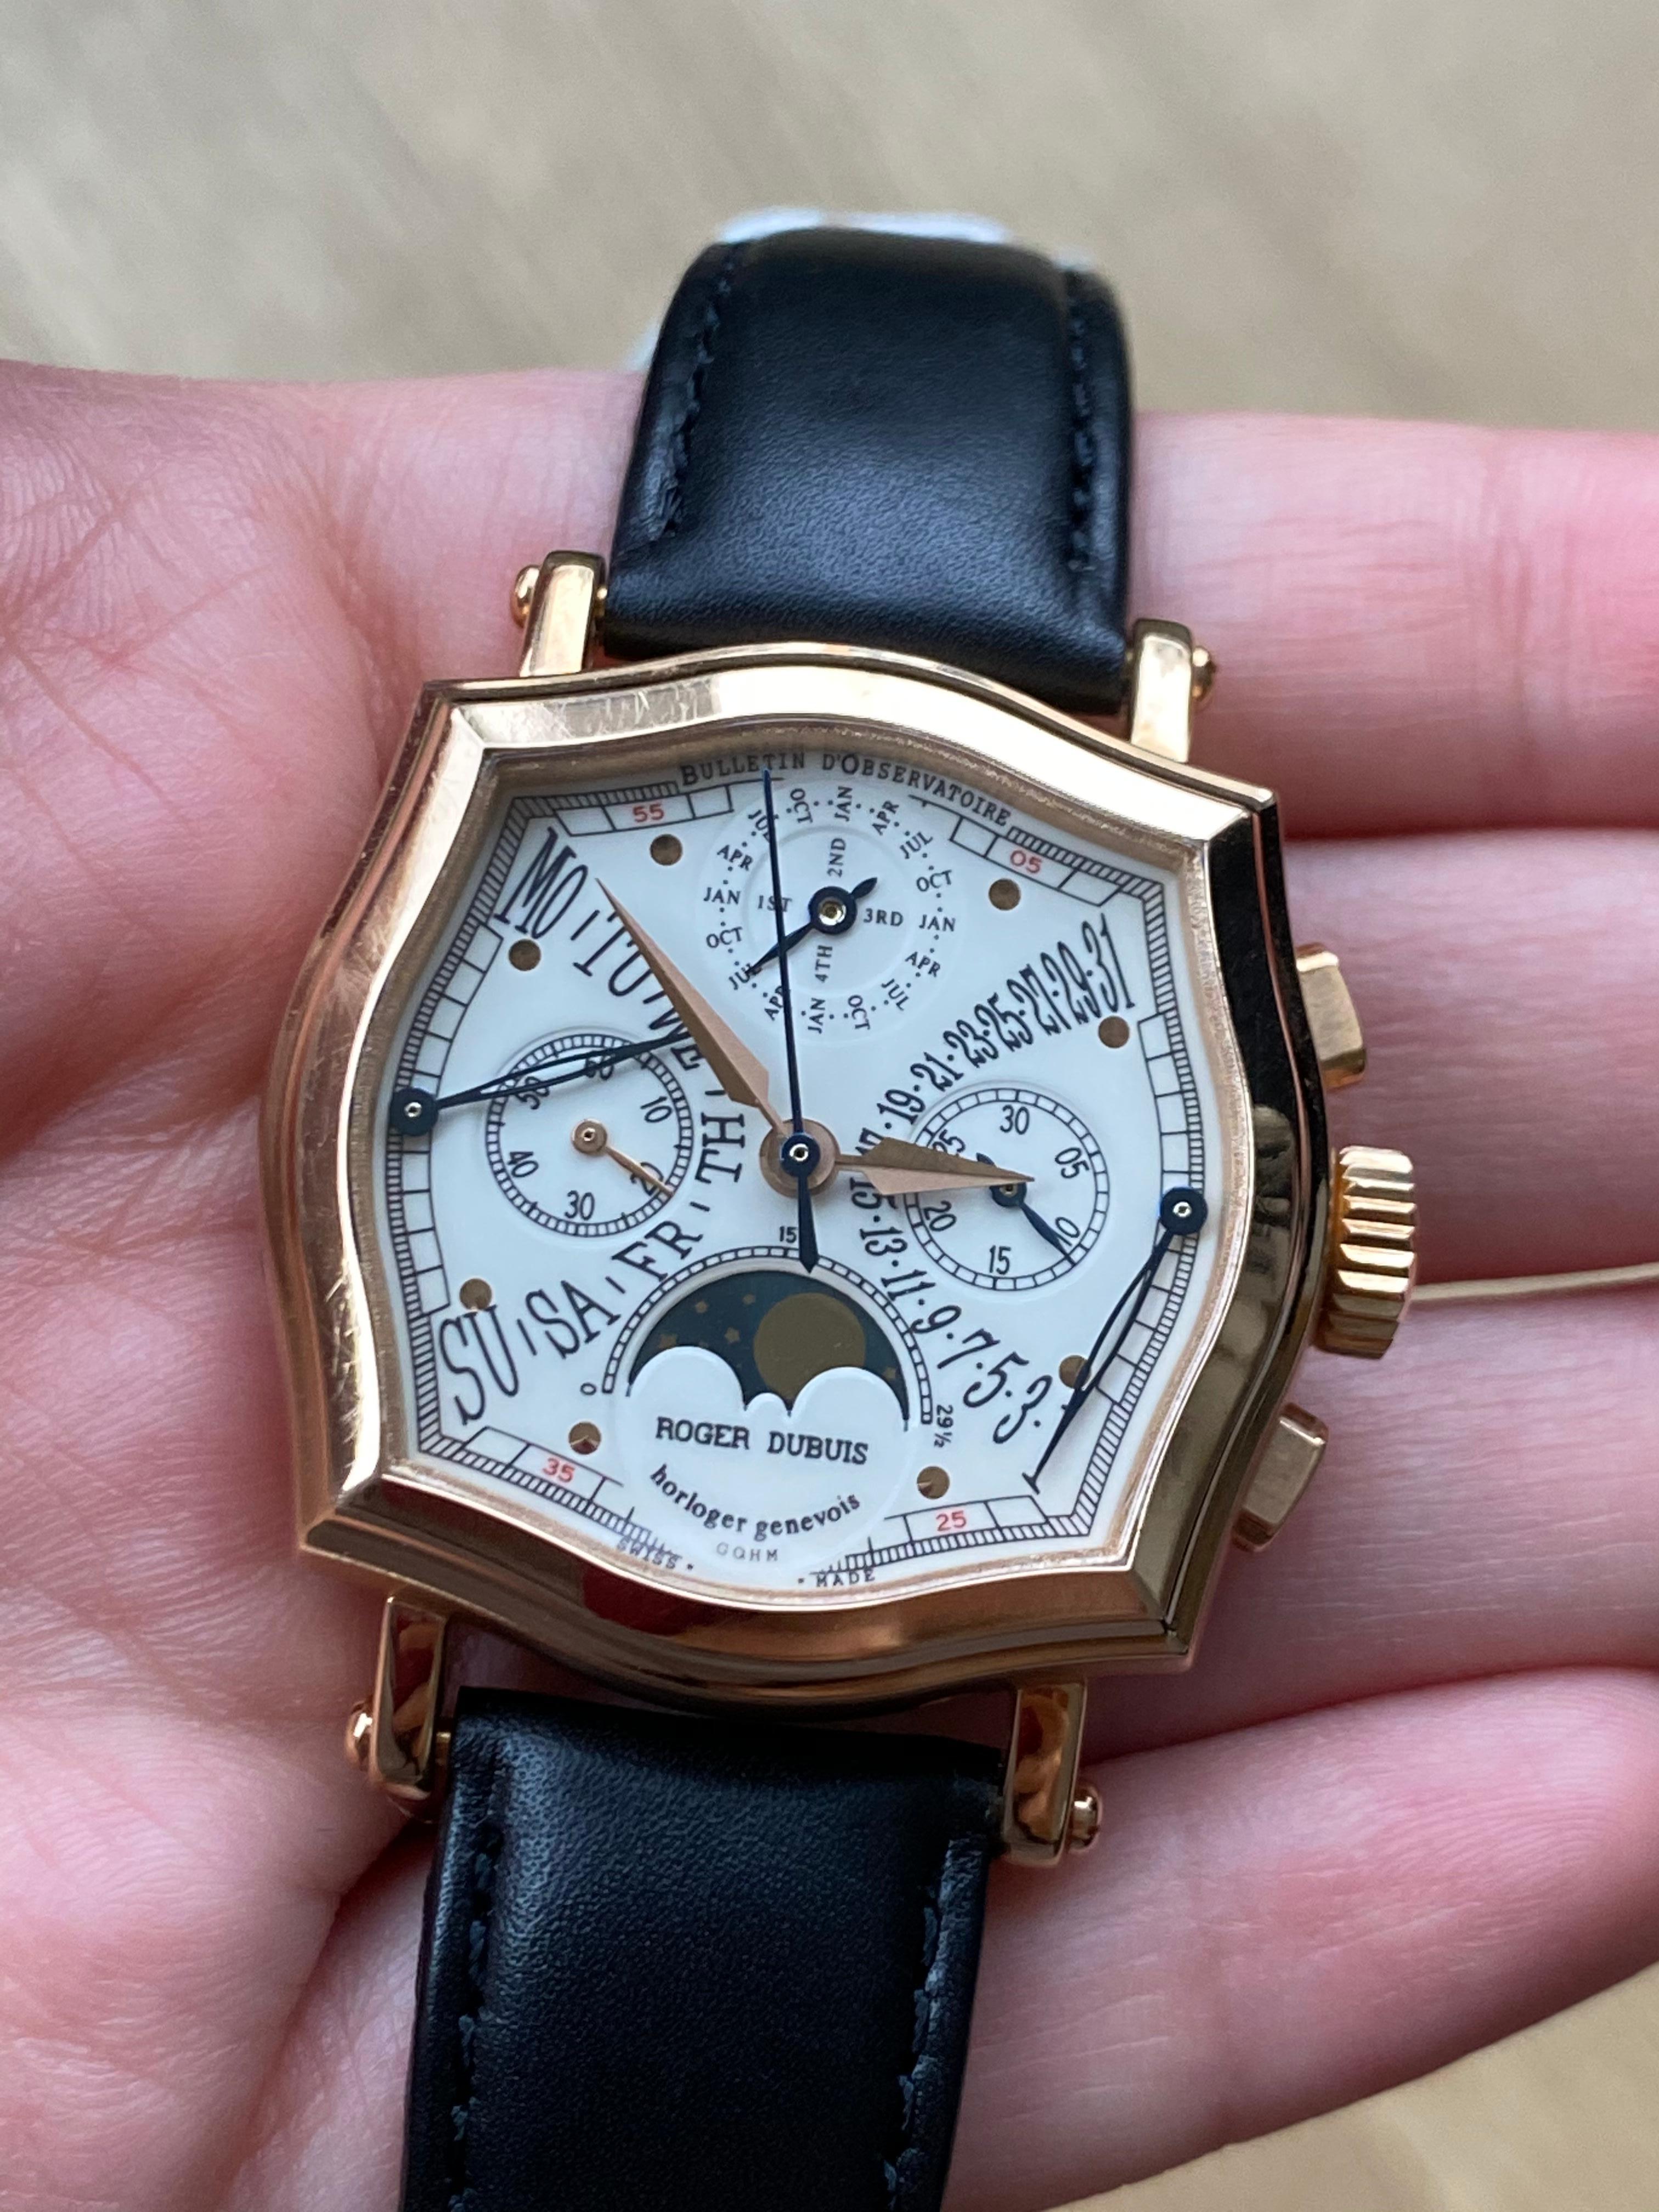 The Roger Dubuis Sympathie Perpetual Calendar Biretrograde (N.24 RD5637 S34) is encased in a 34 mm of rose gold surrounding a white dial on a black genuine calfskin strap (not stamped RD). Features of this Roger Dubuis includes Geneva Hallmark